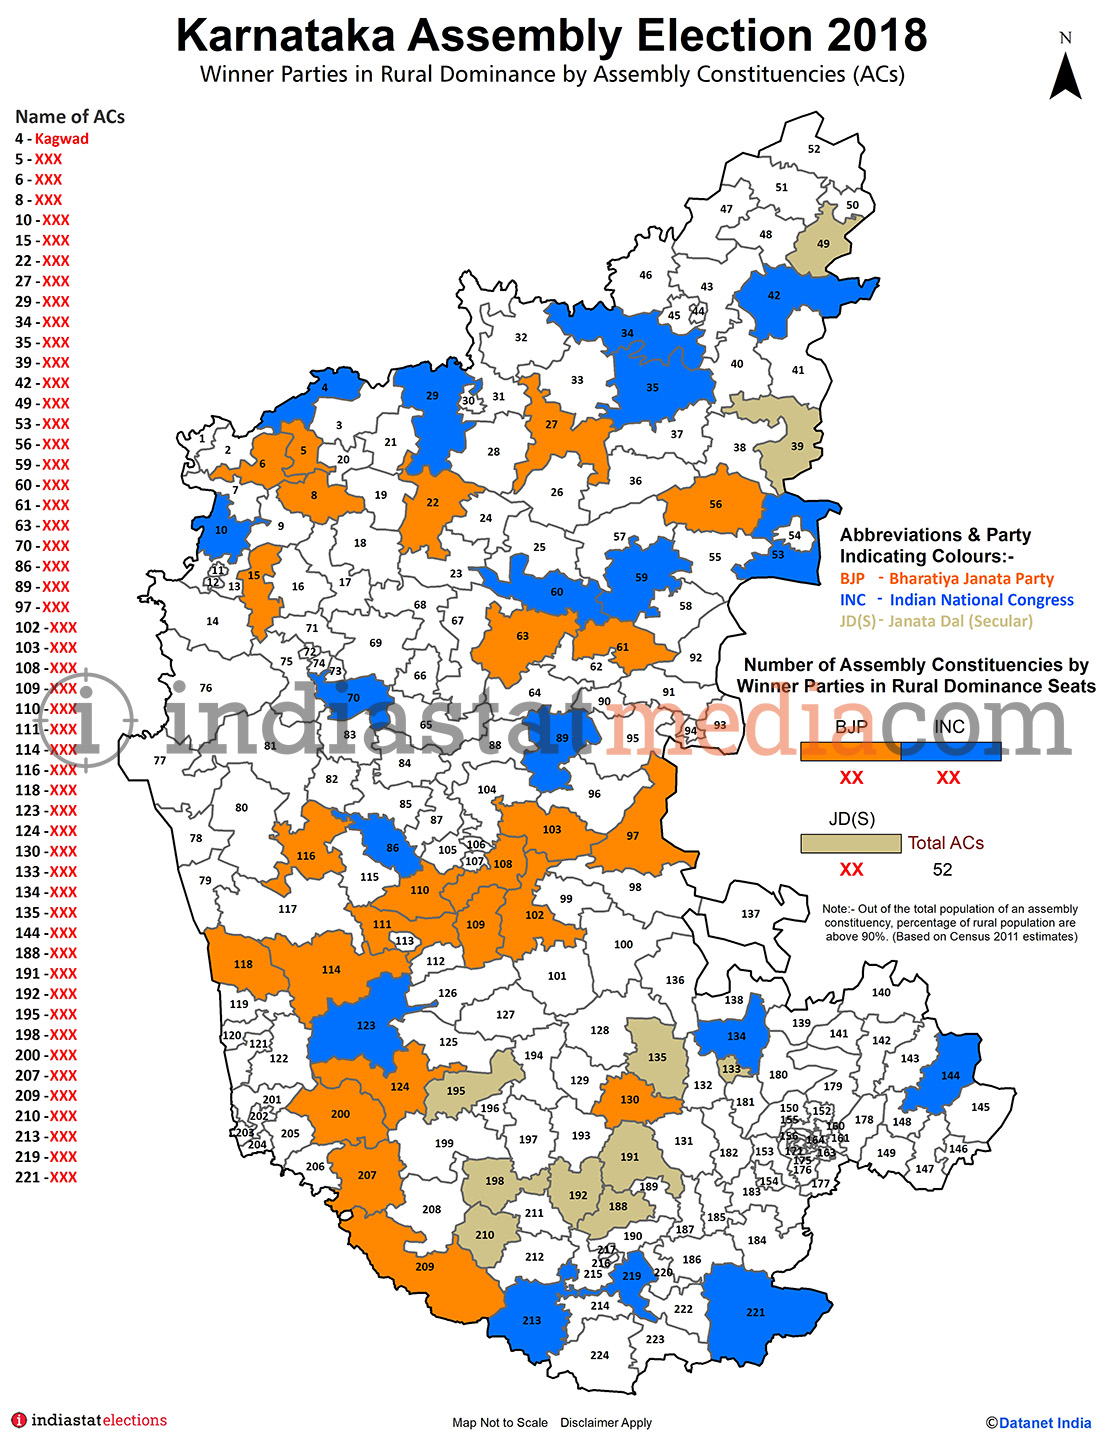 Winner Parties in Rural Dominance Constituencies in Karnataka (Assembly Election - 2018)